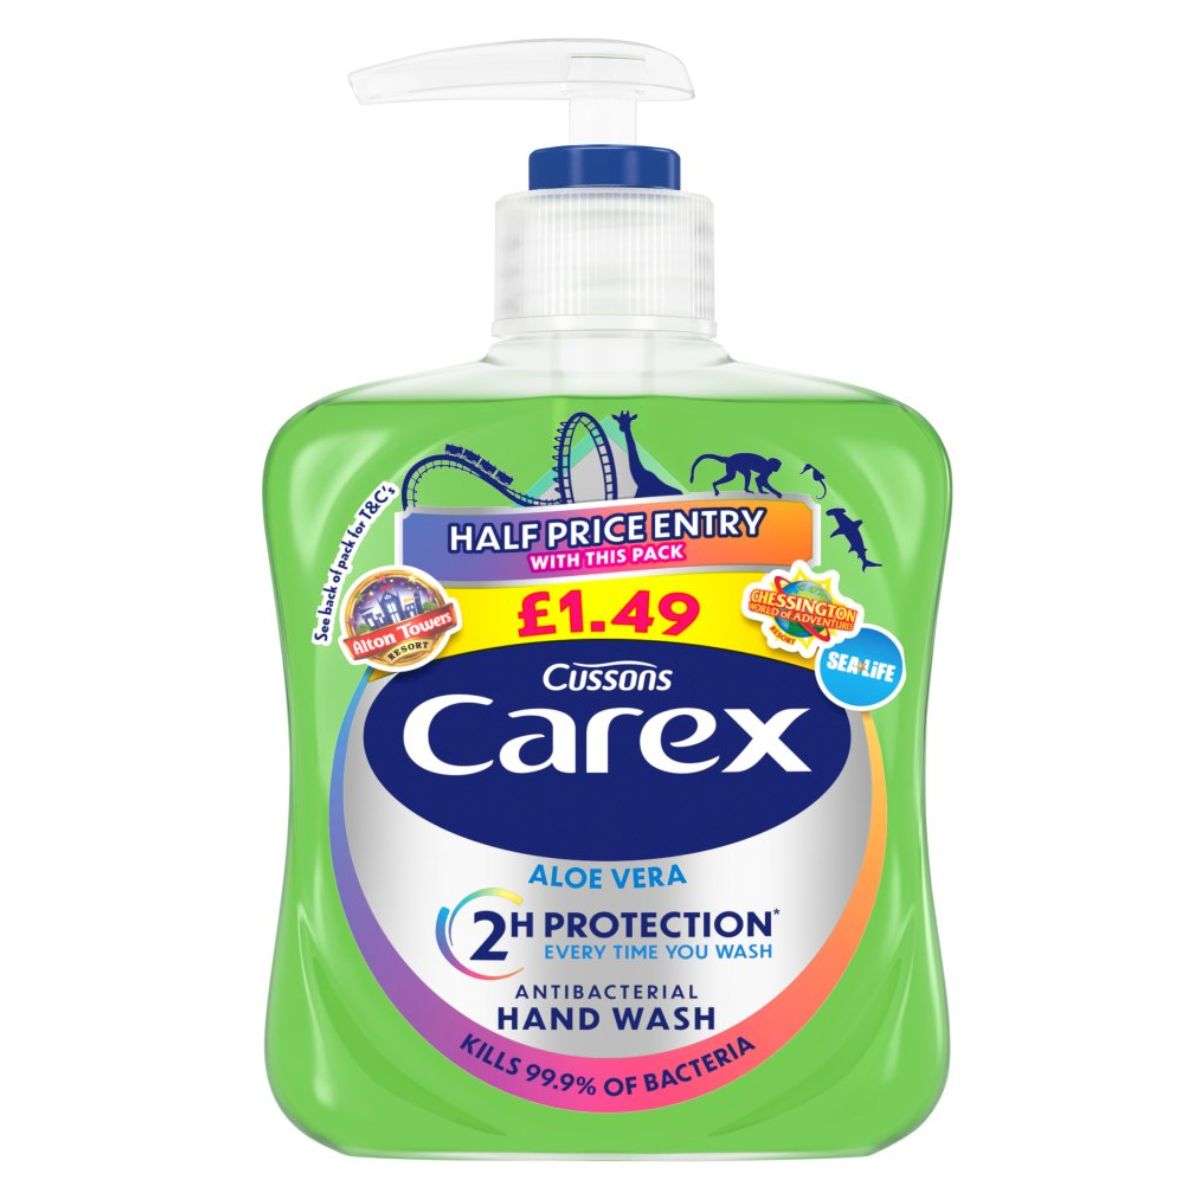 Bottle of Carex - Aloe Vera Antibacterial Hand Wash - 250ml showing pricing and half-price entry promotional offer for Sea Life.